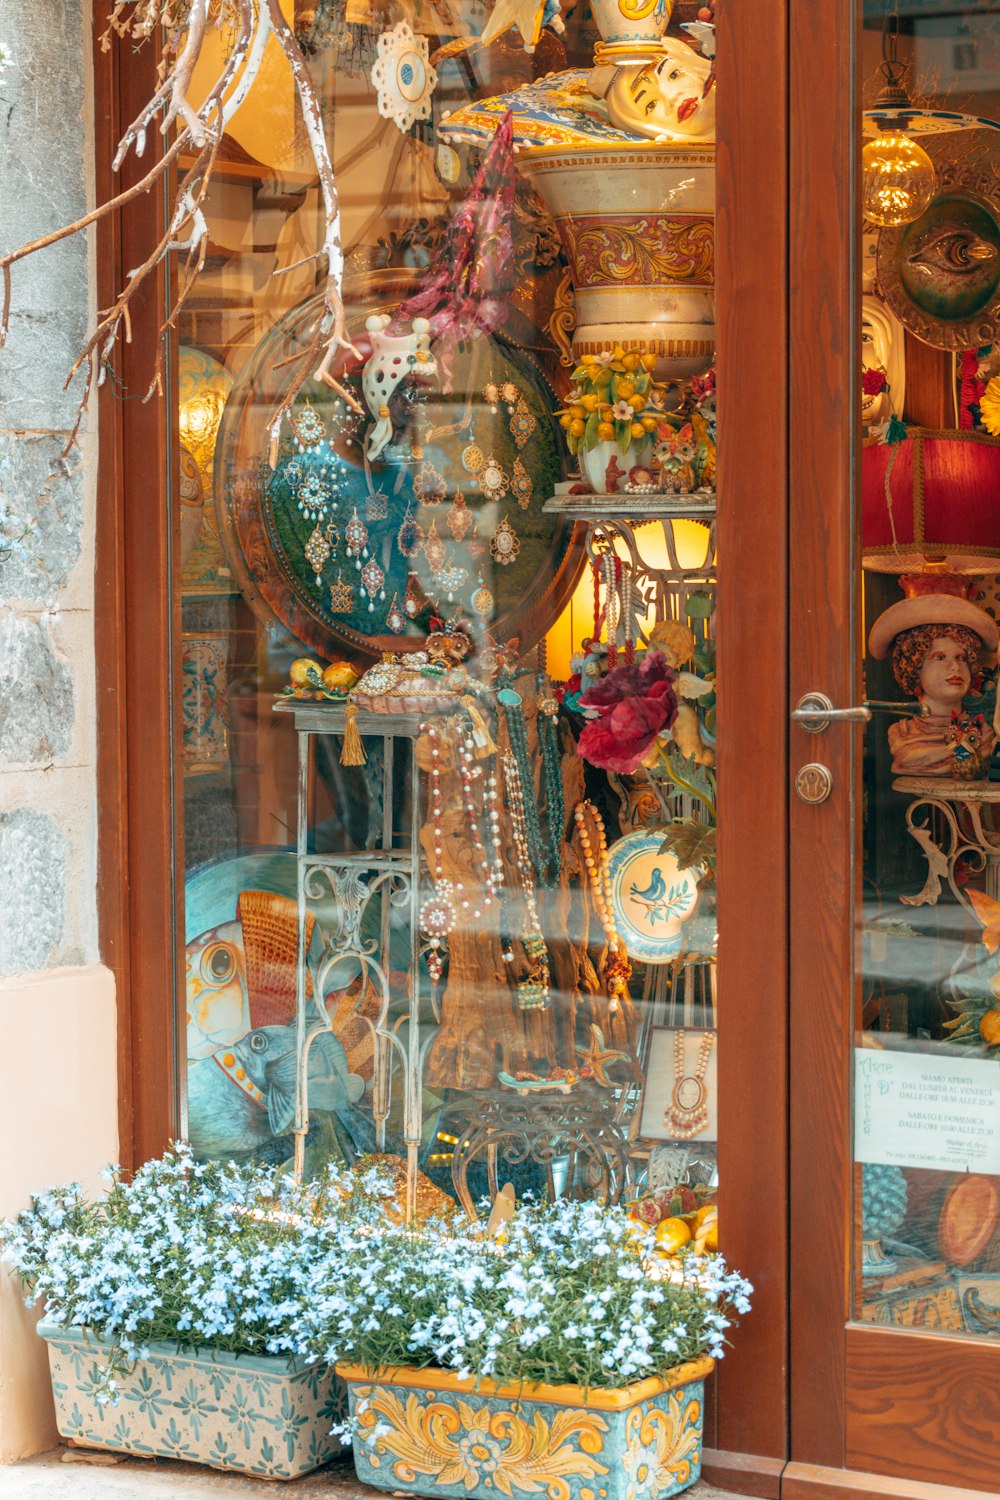 a store front with a display of vases and other items